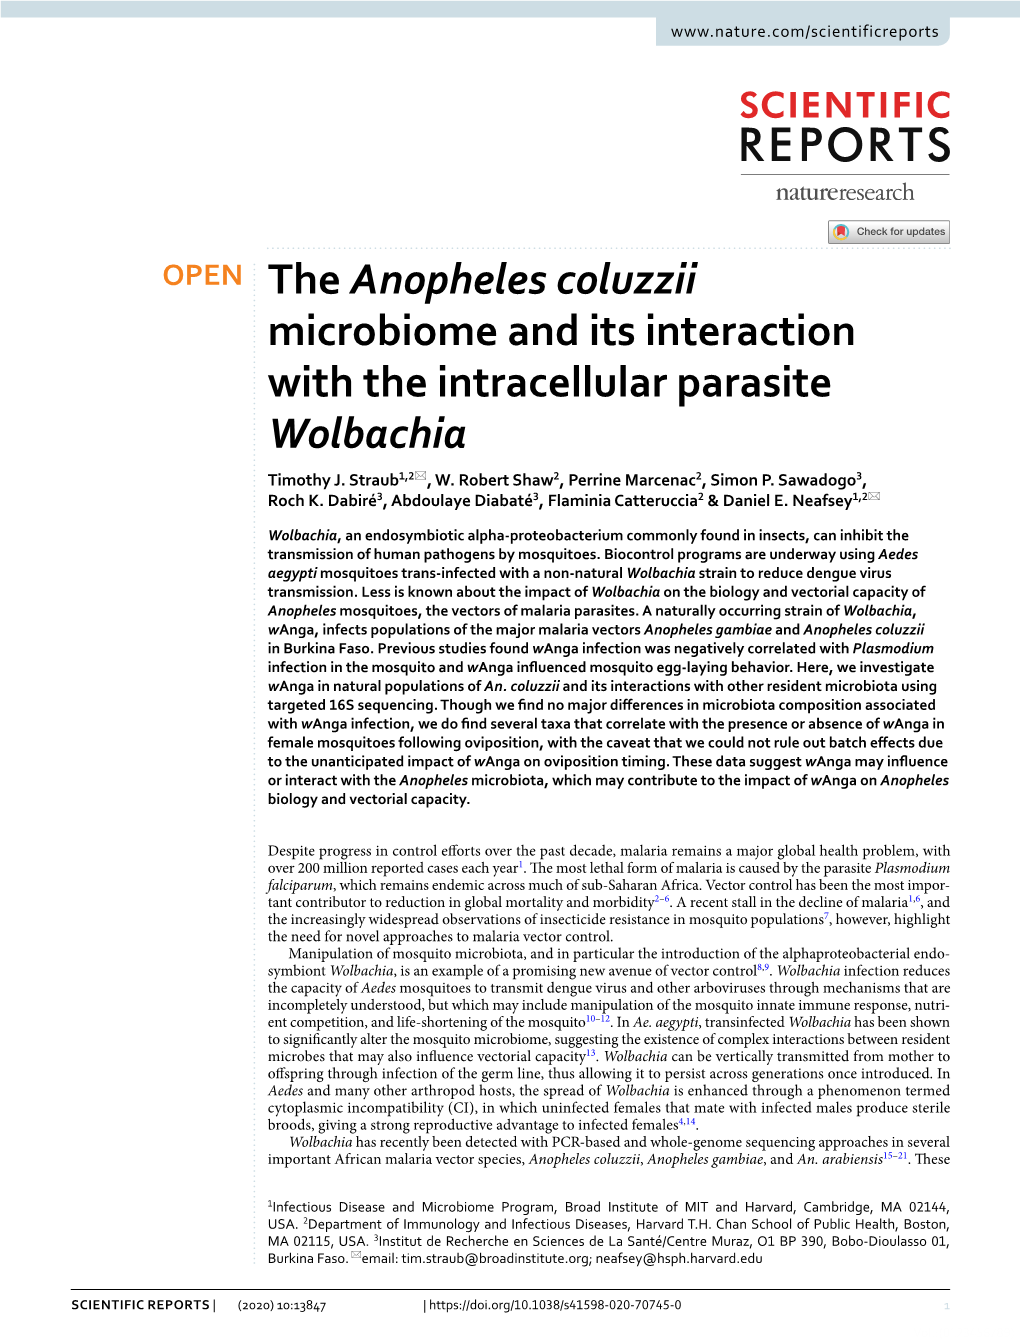 The Anopheles Coluzzii Microbiome and Its Interaction with the Intracellular Parasite Wolbachia Timothy J